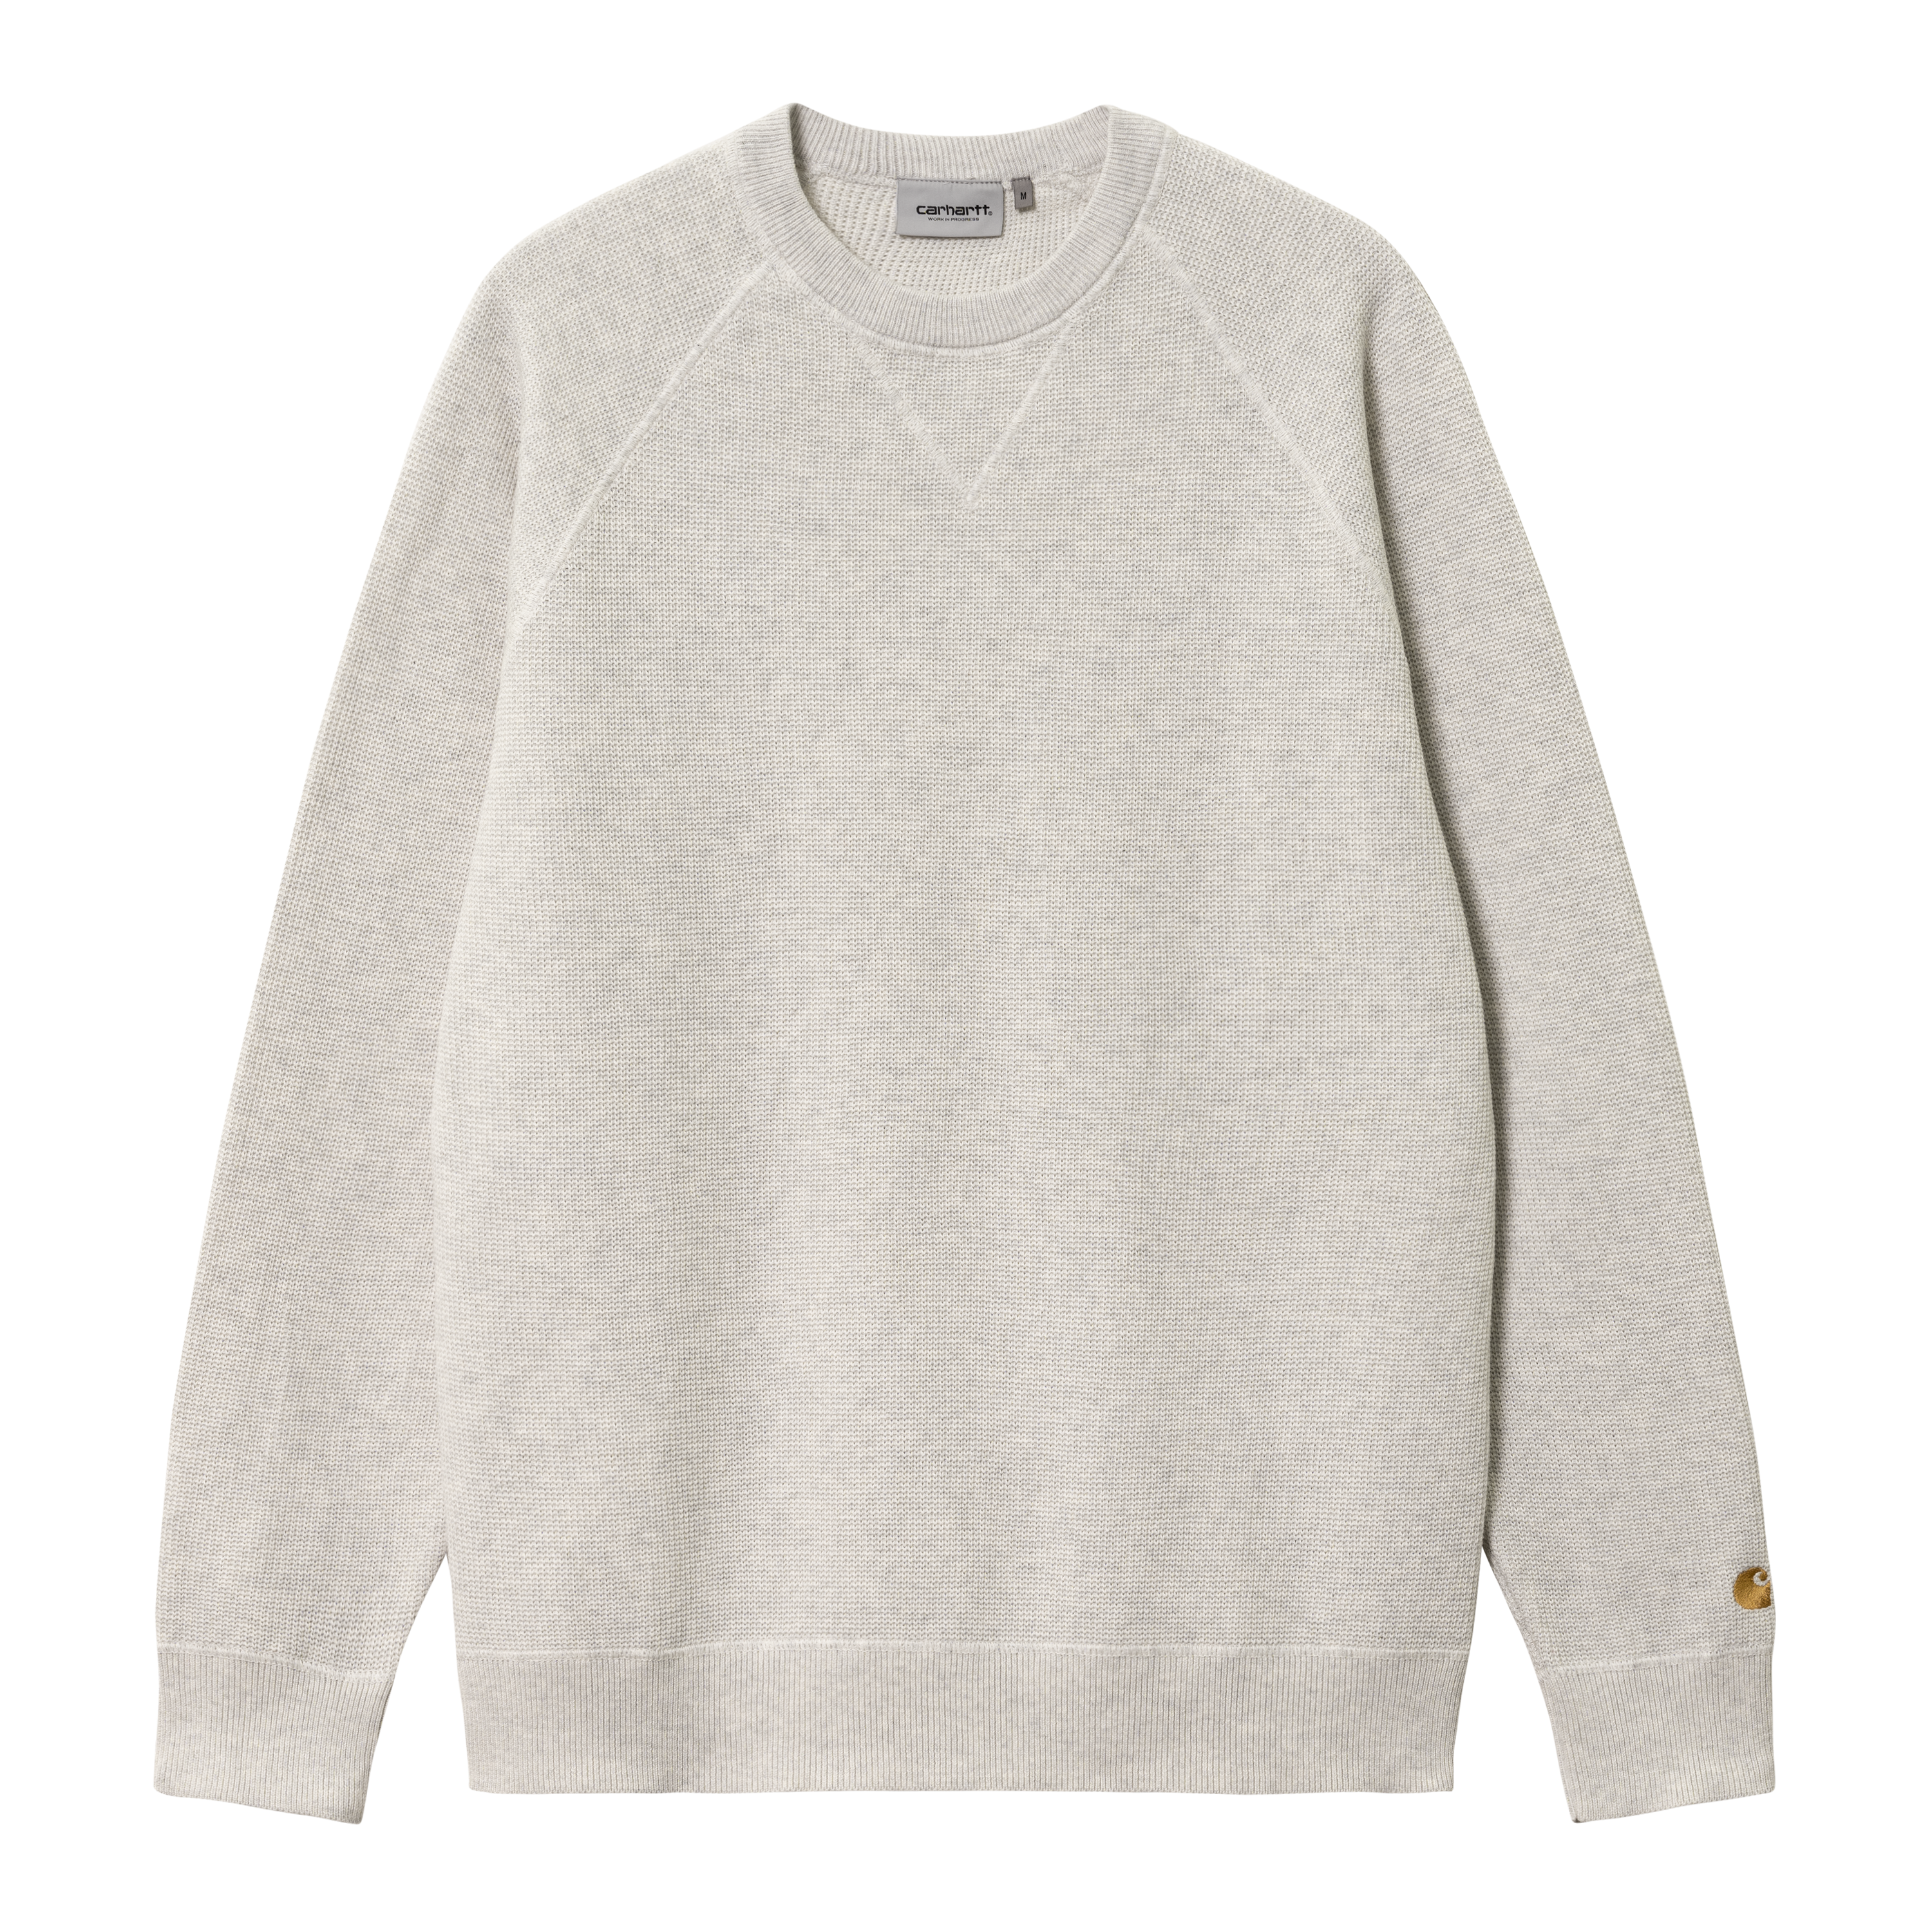 Carhartt WIP Chase Sweater in Grey